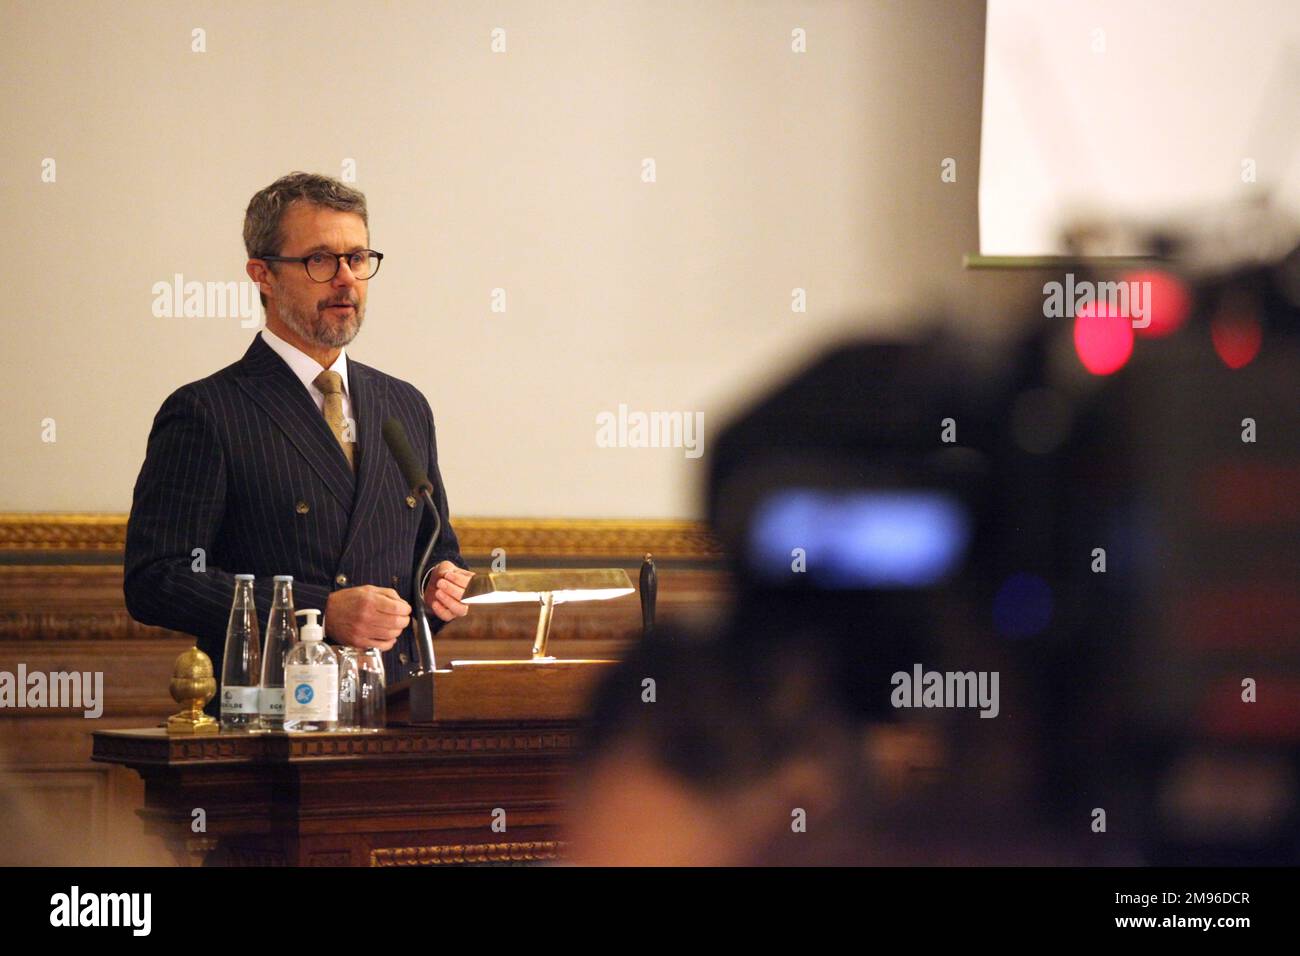 Kopenhagen, Denmark. 17th Jan, 2023. Denmark's Crown Prince Frederik speaks at Copenhagen City Hall at the opening event for the Year of Architecture 2023, in which the Danish capital Copenhagen can call itself the World Capital of Architecture. Credit: Steffen Trumpf/dpa/Alamy Live News Stock Photo